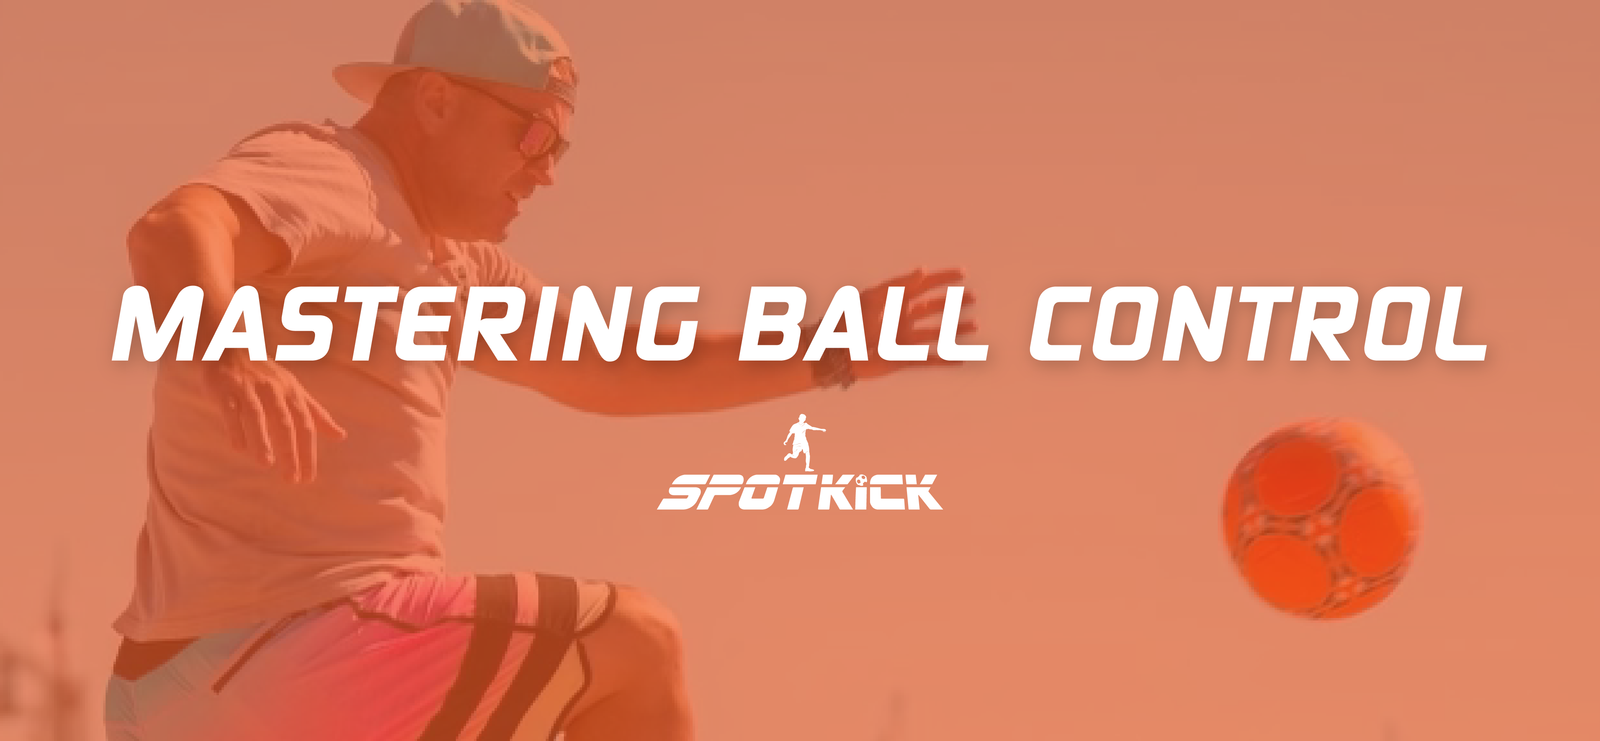 mastering ball control in soccer, soccer ball control